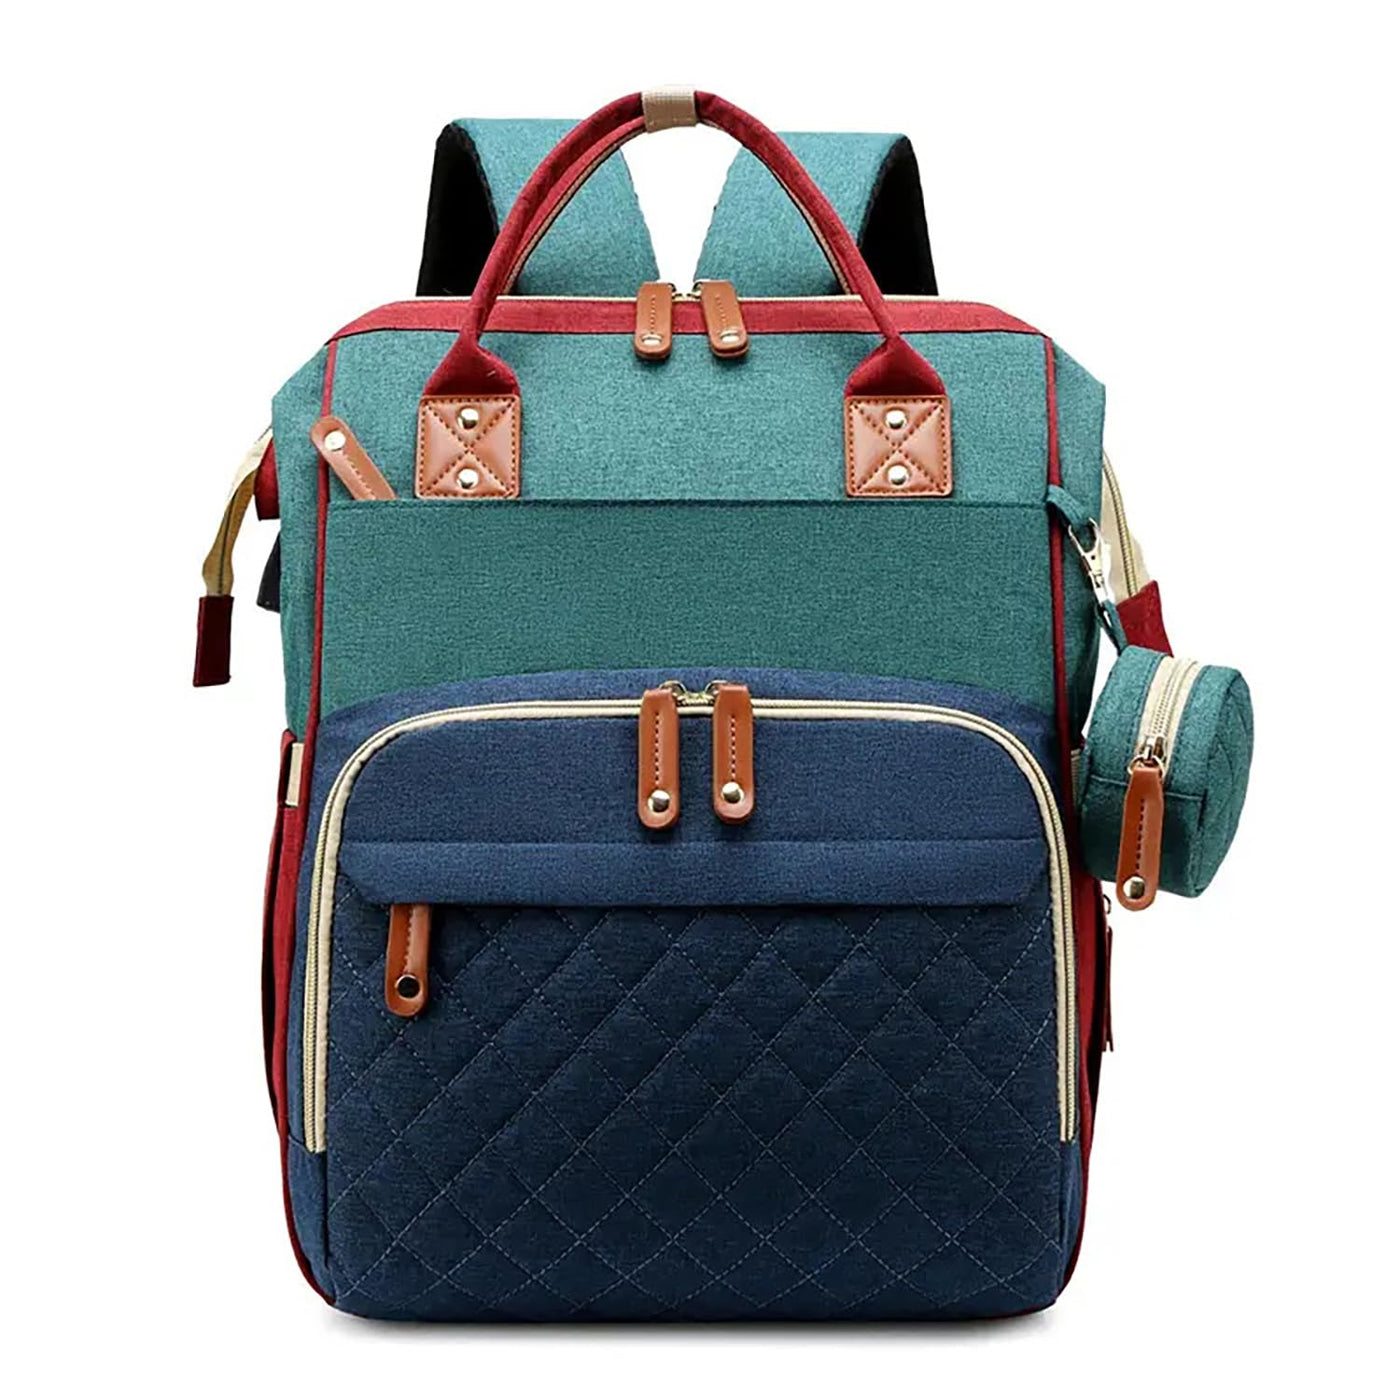 Baby Diaper Bag Maternity Backpack Quilted- Green/Blue